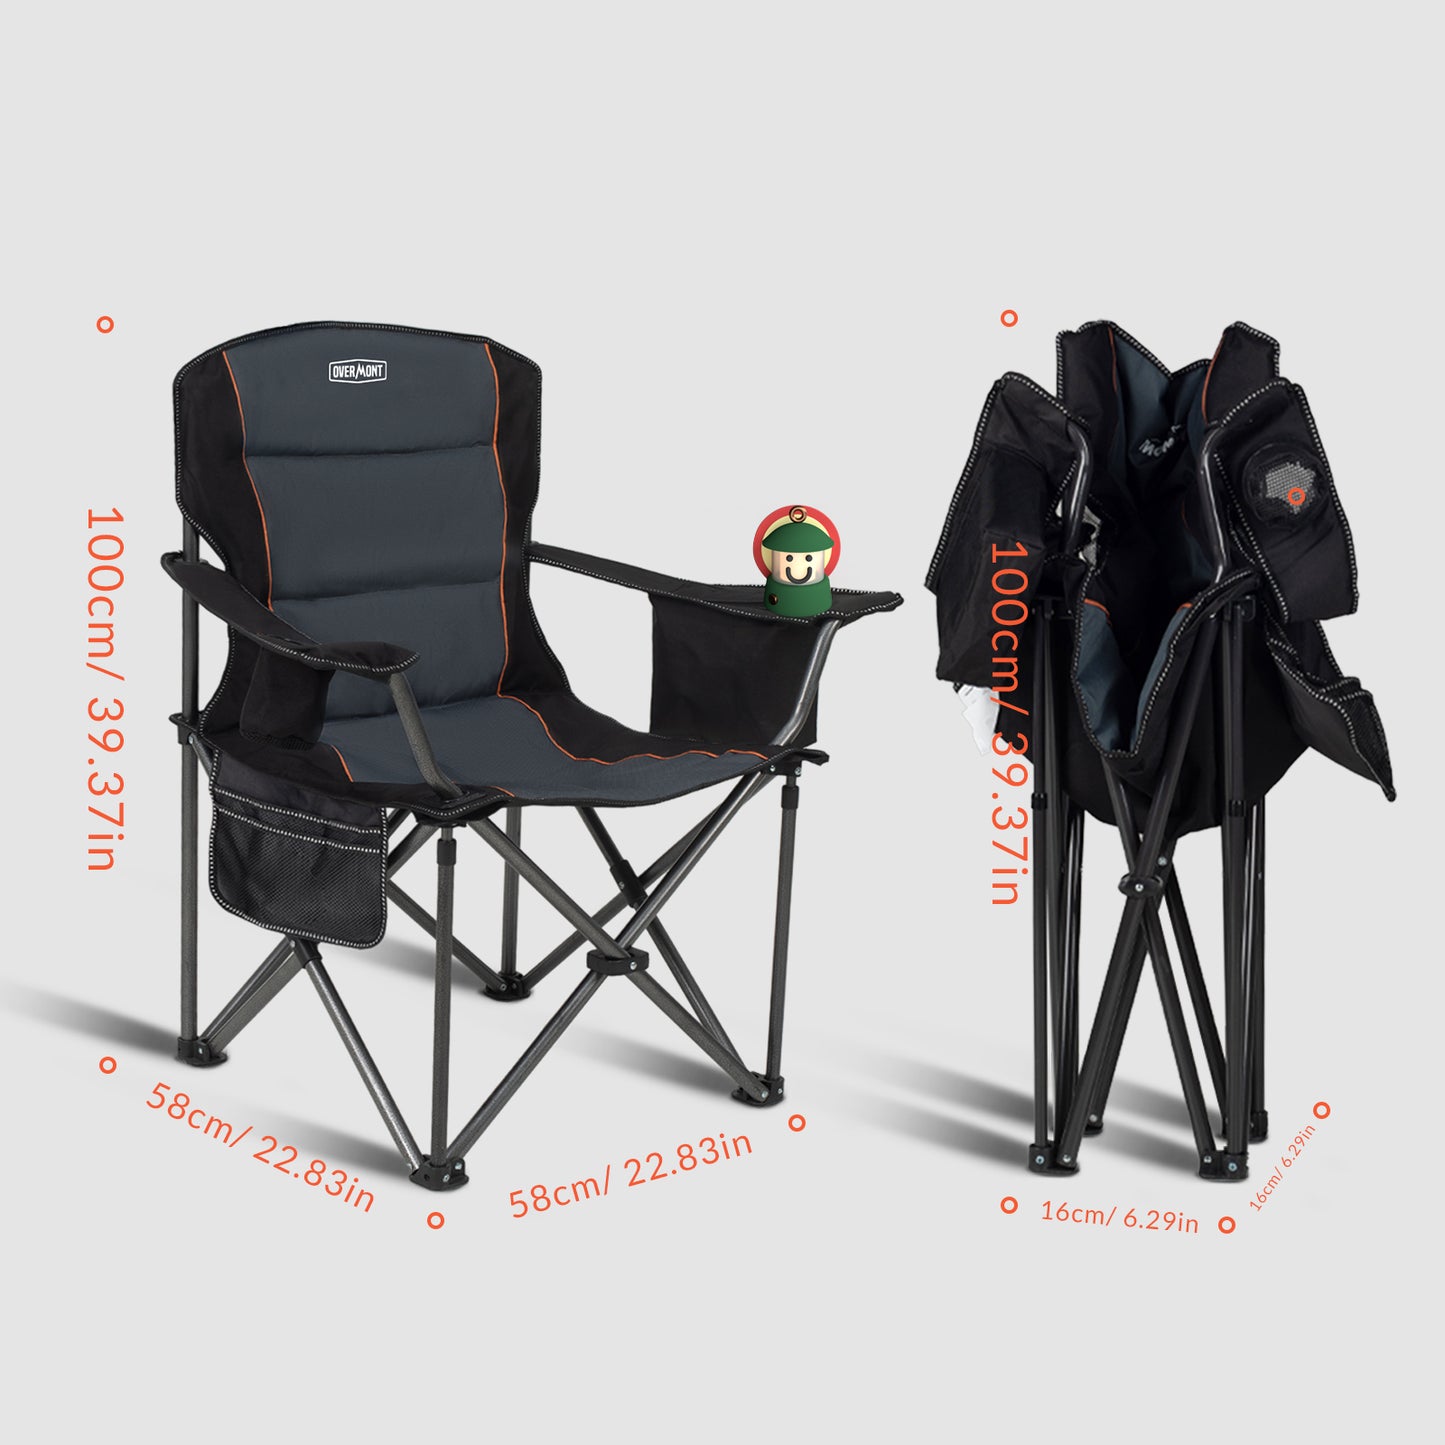 folding camping chair size